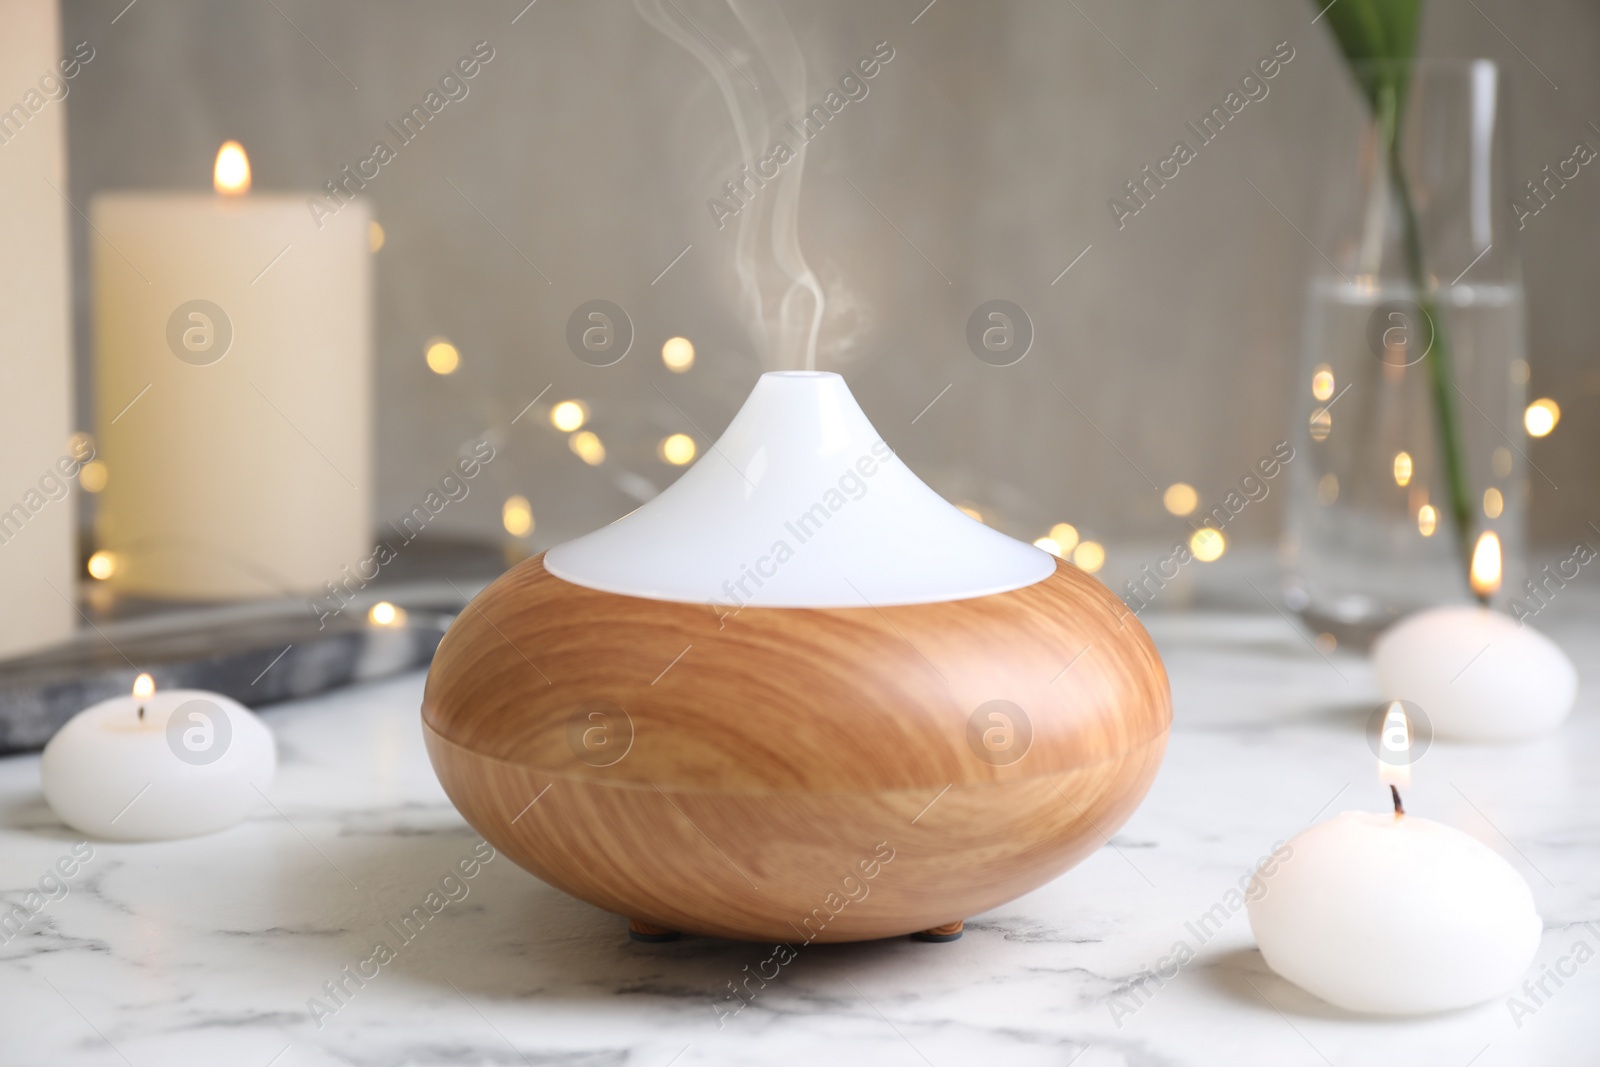 Photo of Aroma oil diffuser and burning candles on white marble table